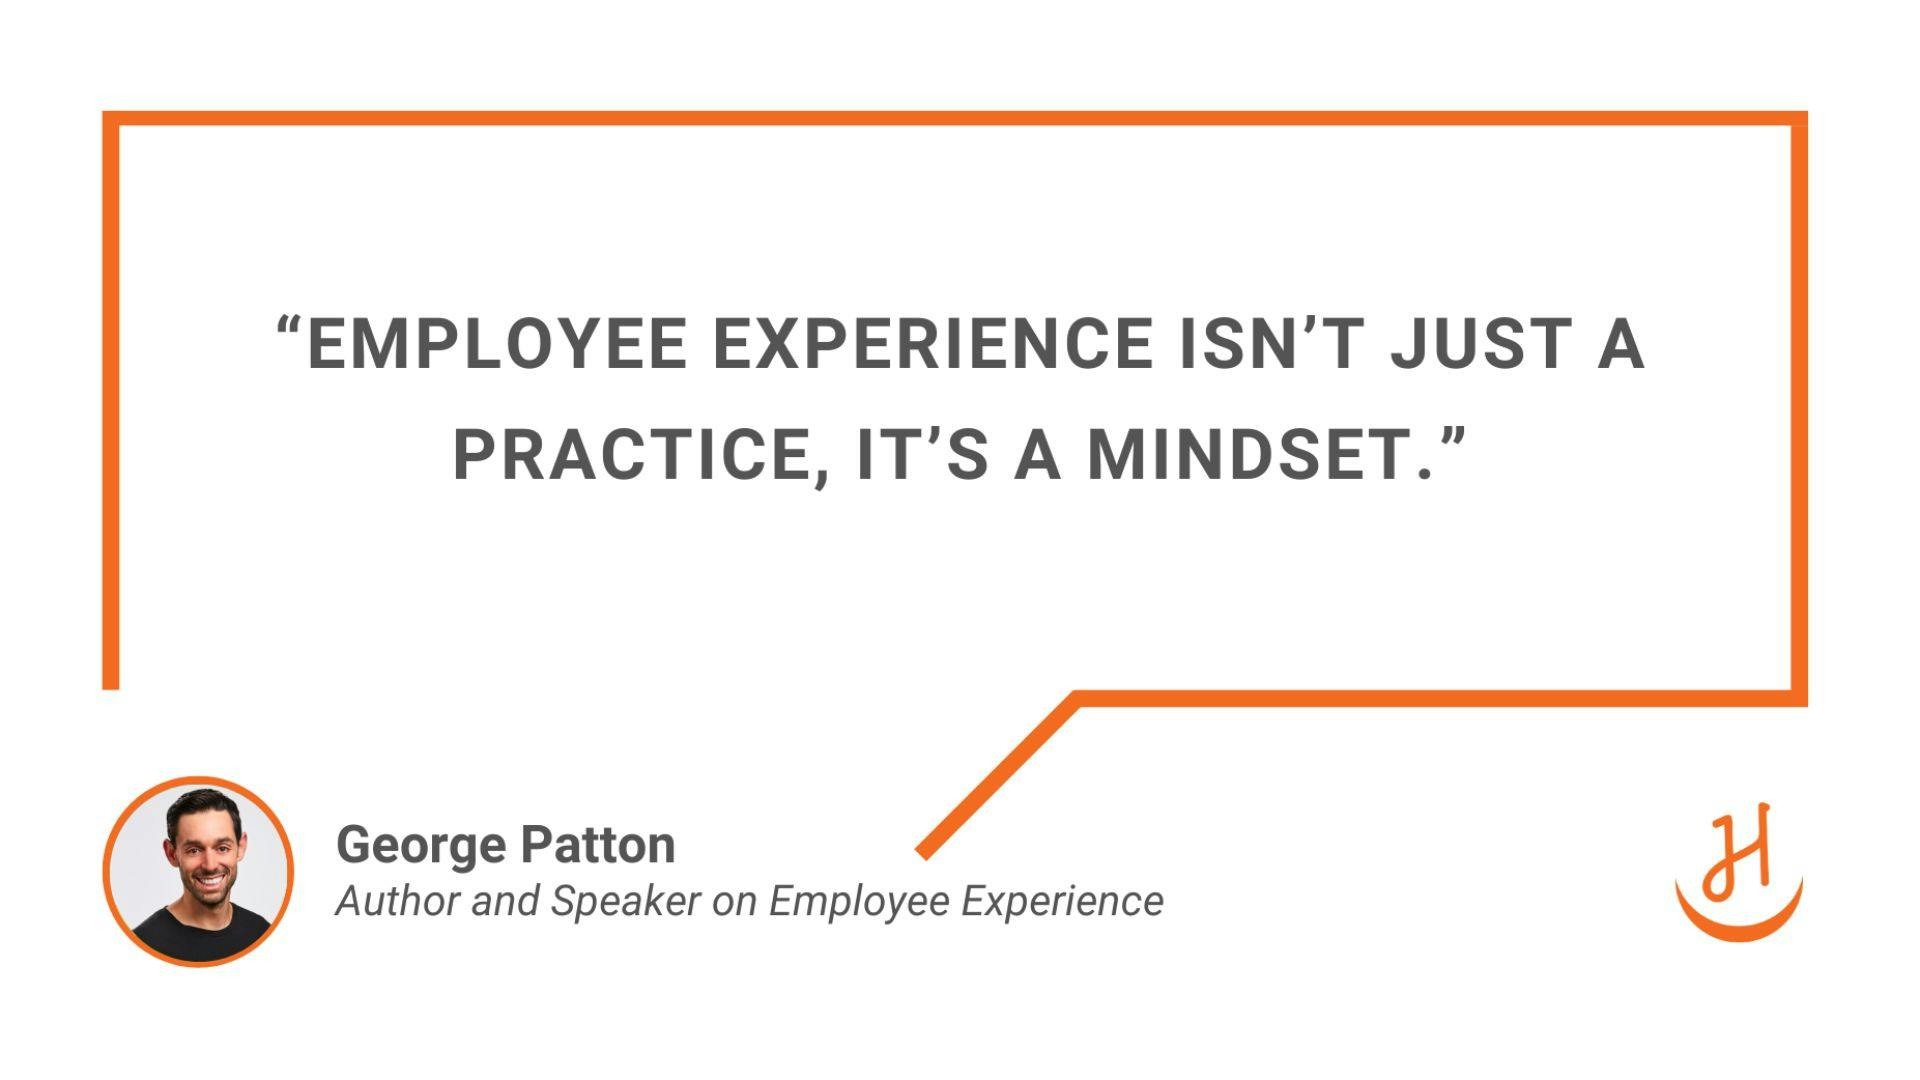 Jacob Morgan Quote, “Employee experience isn’t just a practice, it’s a mindset”